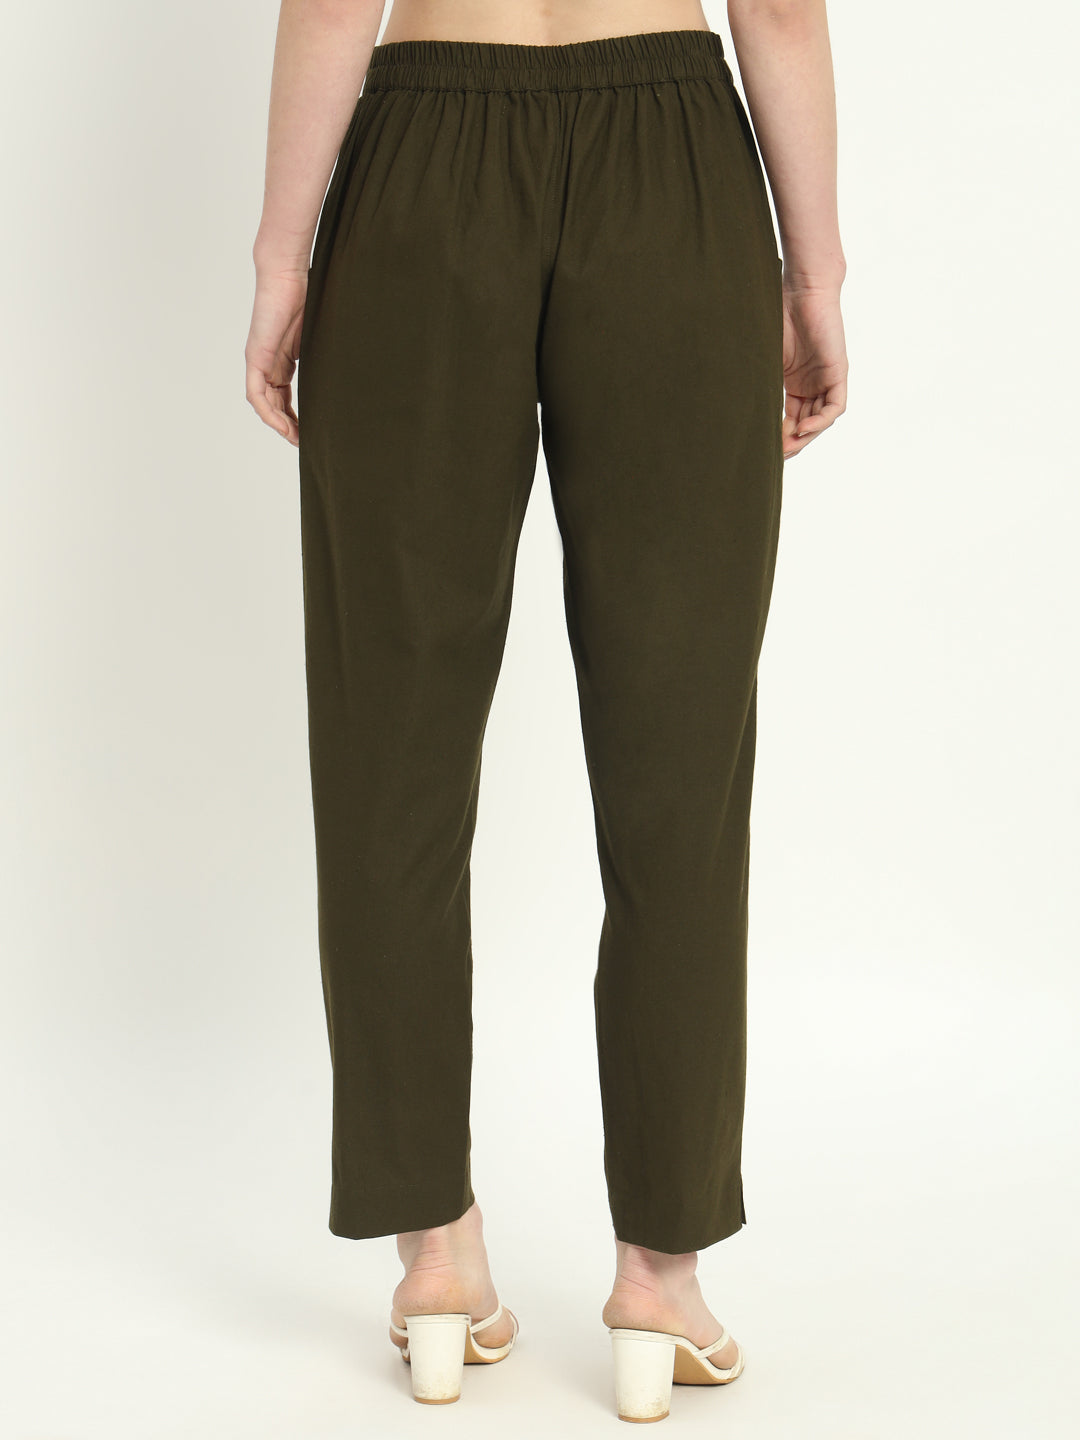 tapered Olive Green Pants